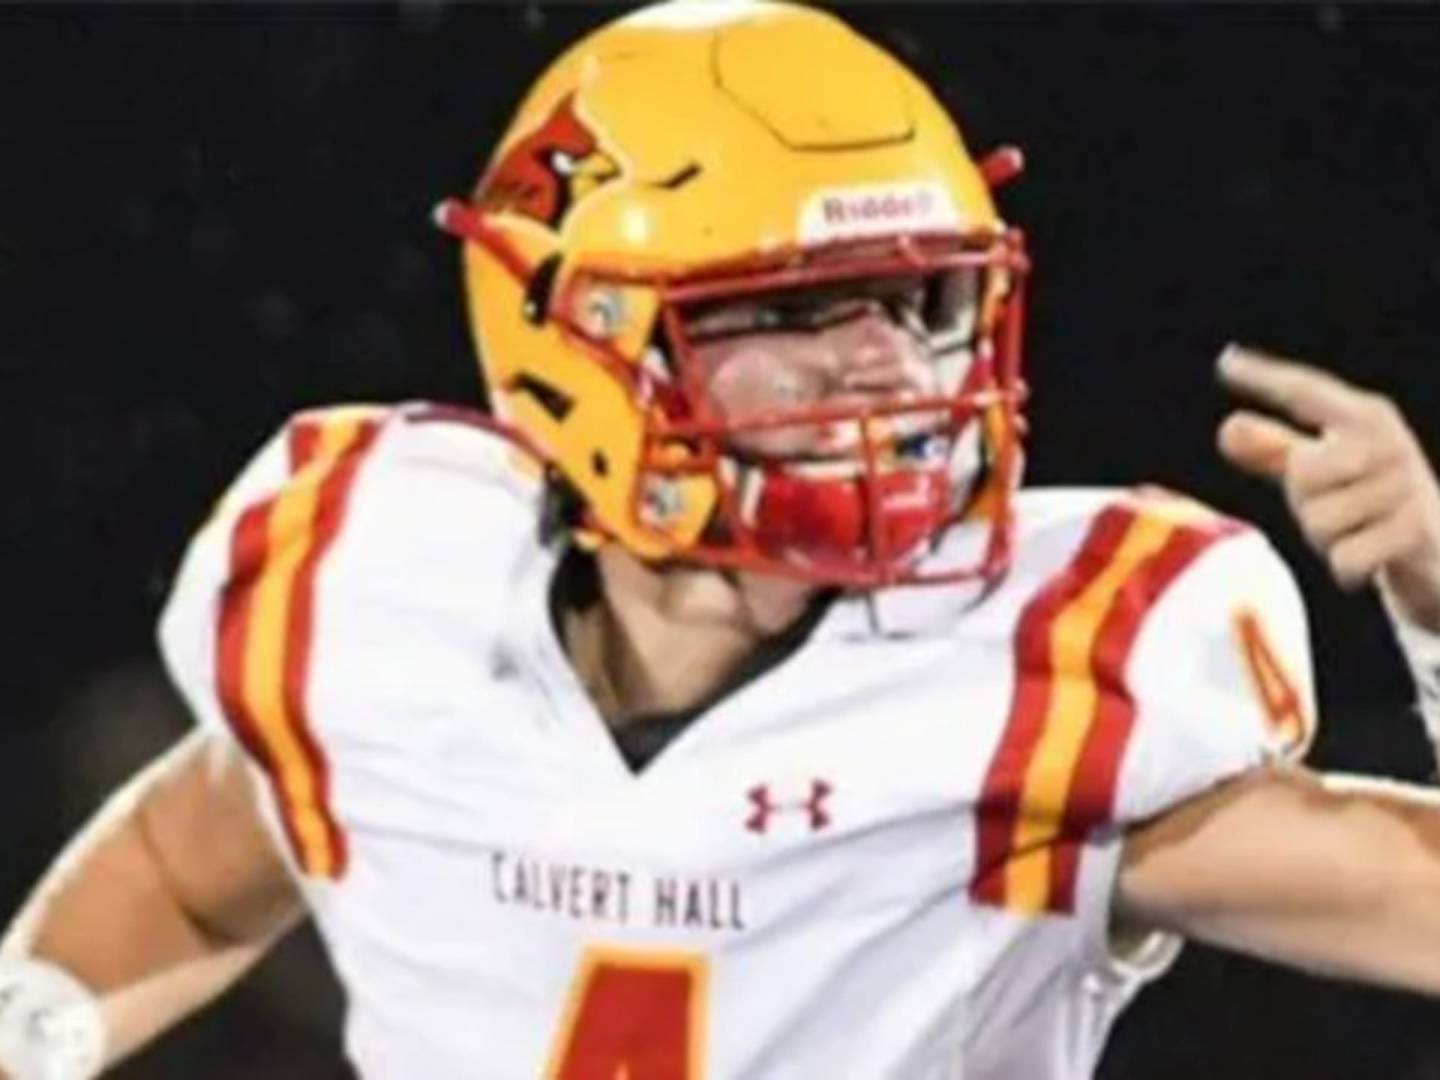 Calvert Hall's Noah Brannock, a William & Mary commit, returns to lead the Cardinals' quest for a second straight MIAA A Conference championship.